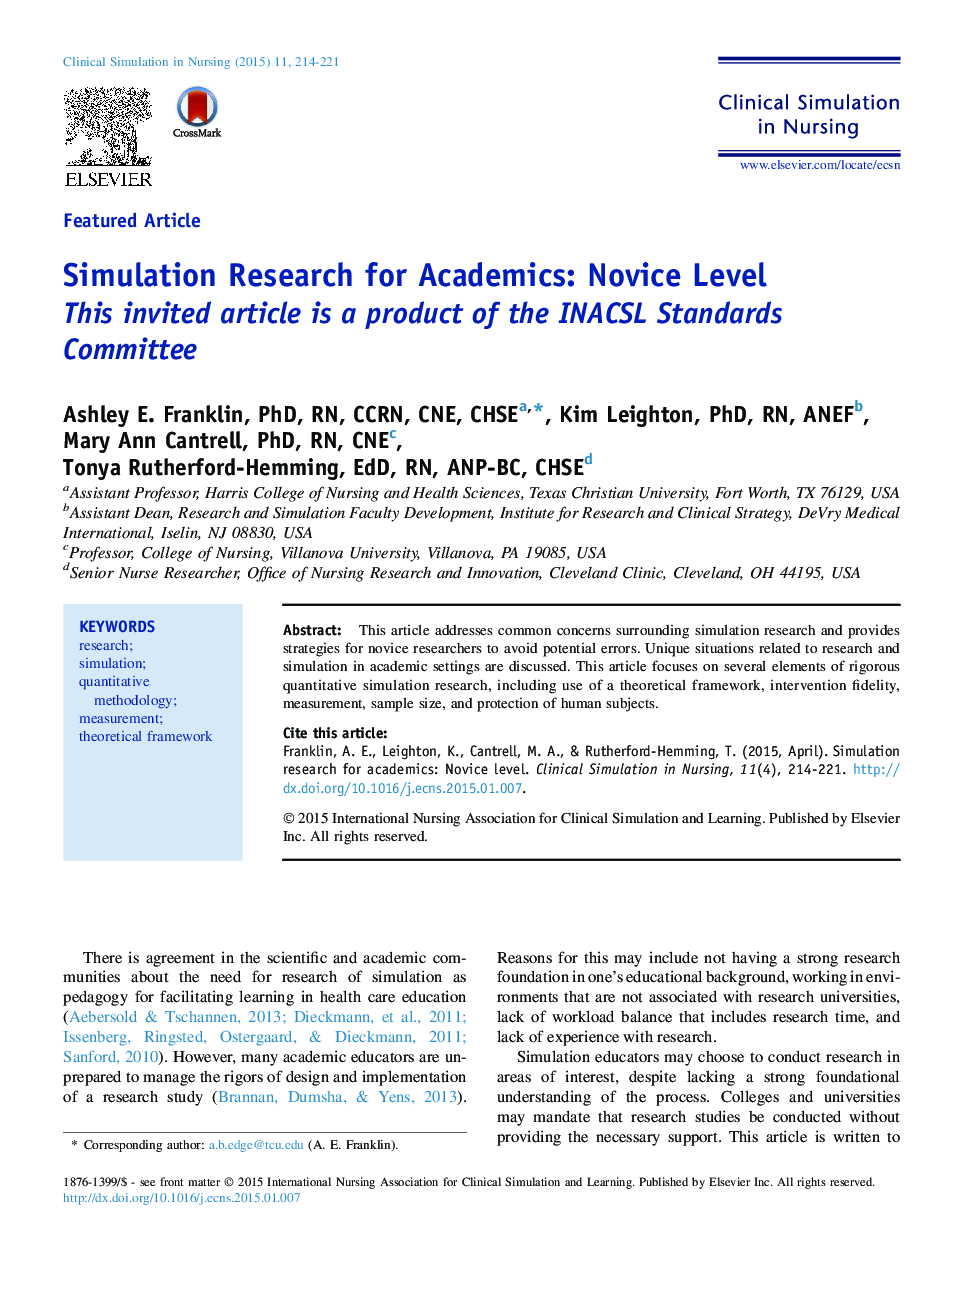 Simulation Research for Academics: Novice Level